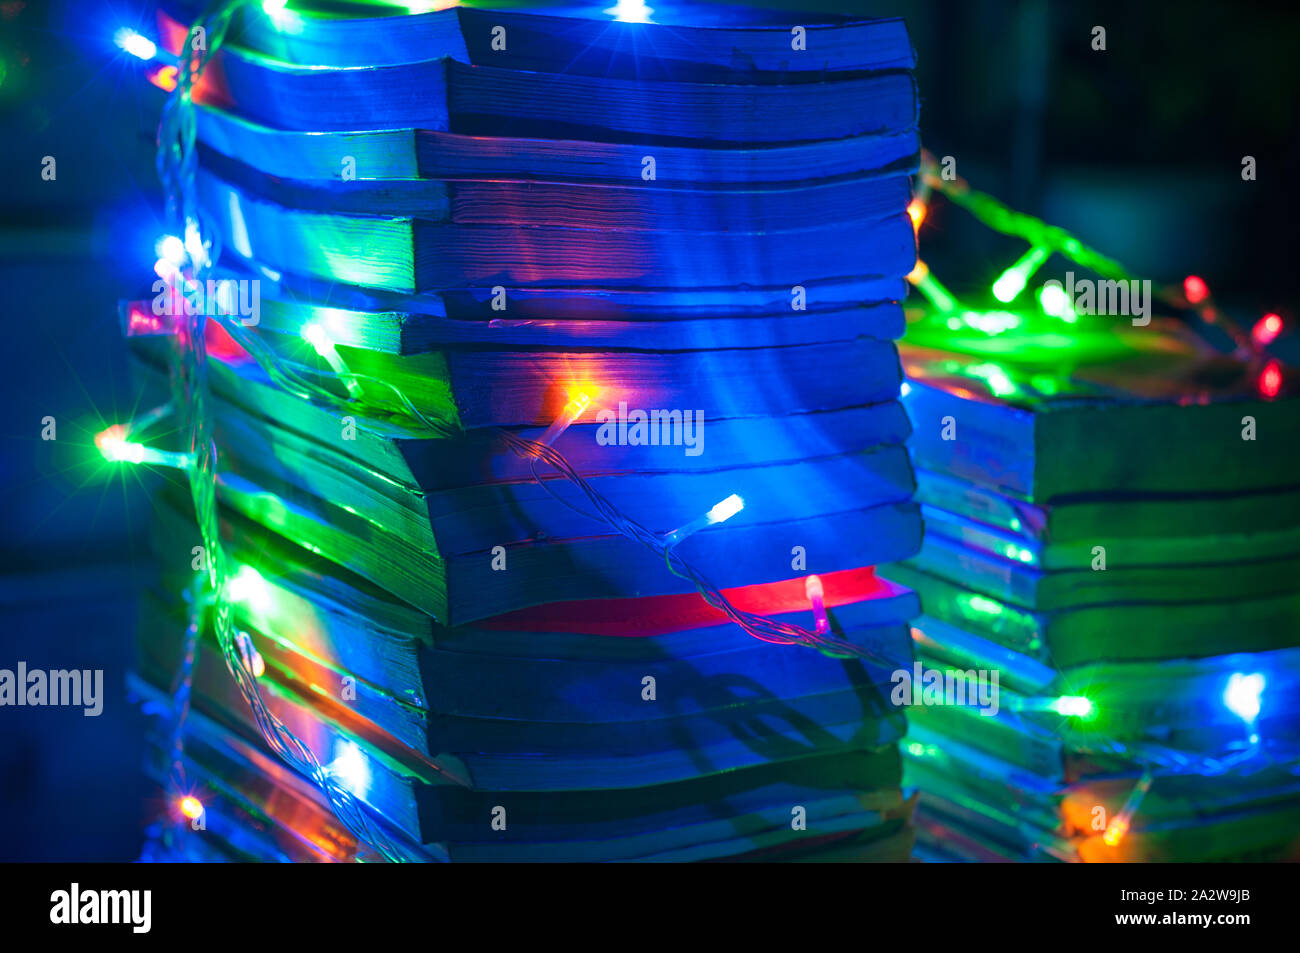 Christmas light coiled all around on a tower of books. String lights. Close up shot of book compilations. Blue wallpaper. Stock Photo